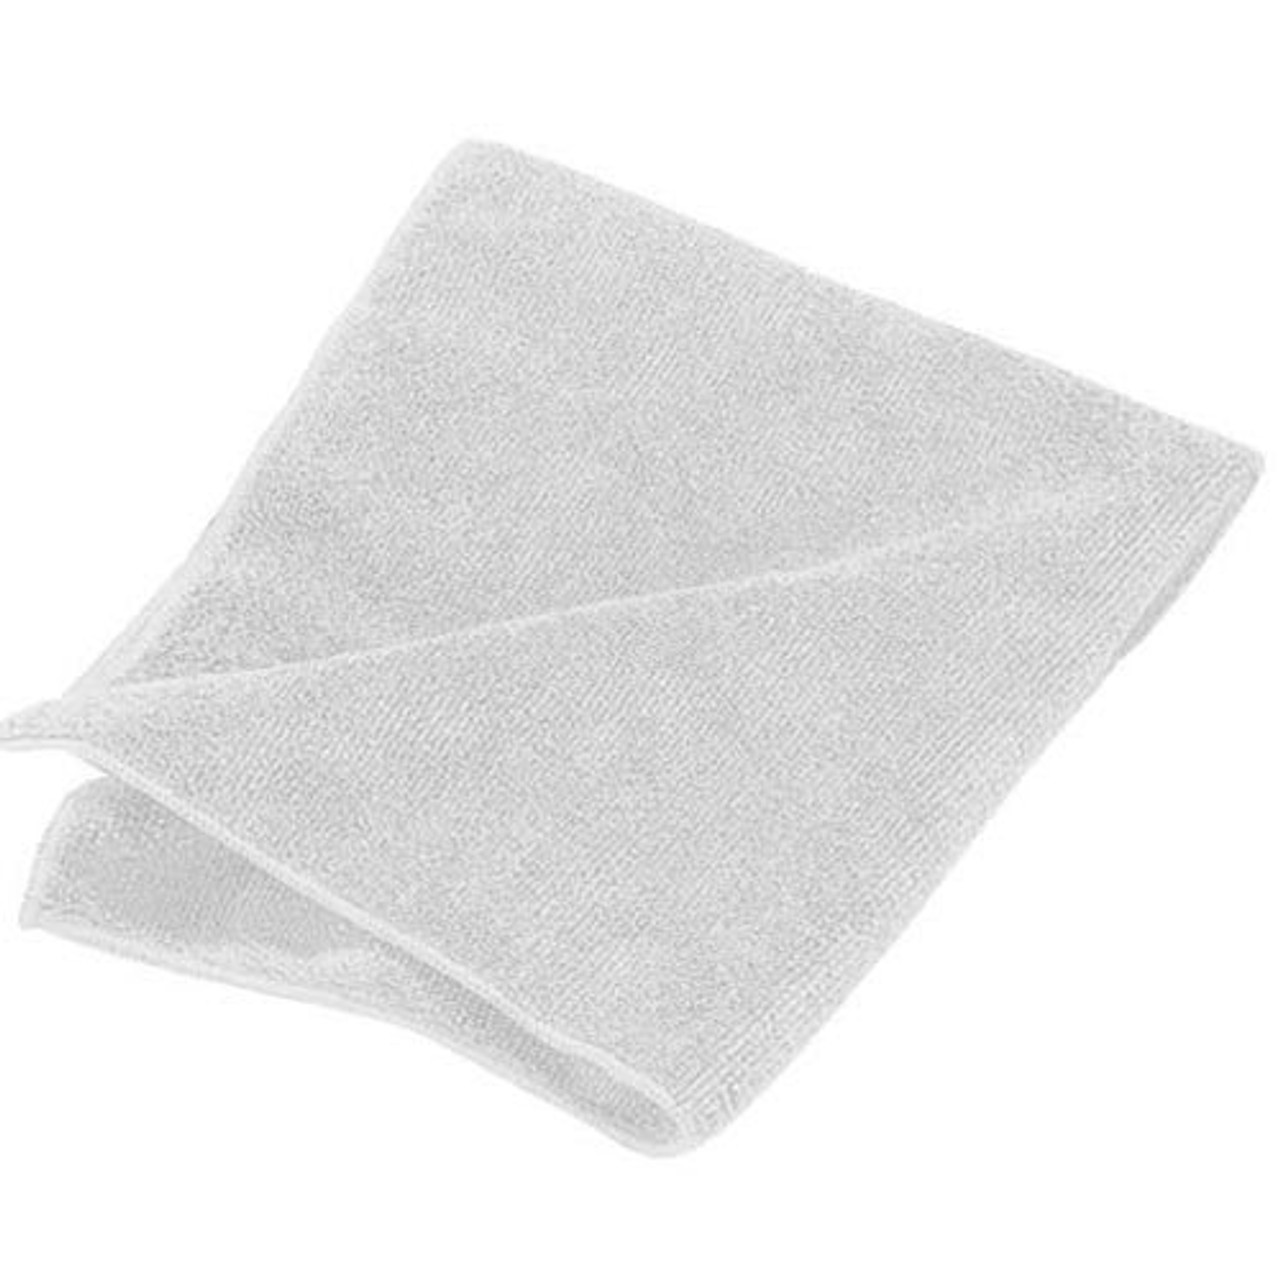 Carlisle 3633402 16 x 16 White Terry Microfiber Cleaning Cloth - 12/Case